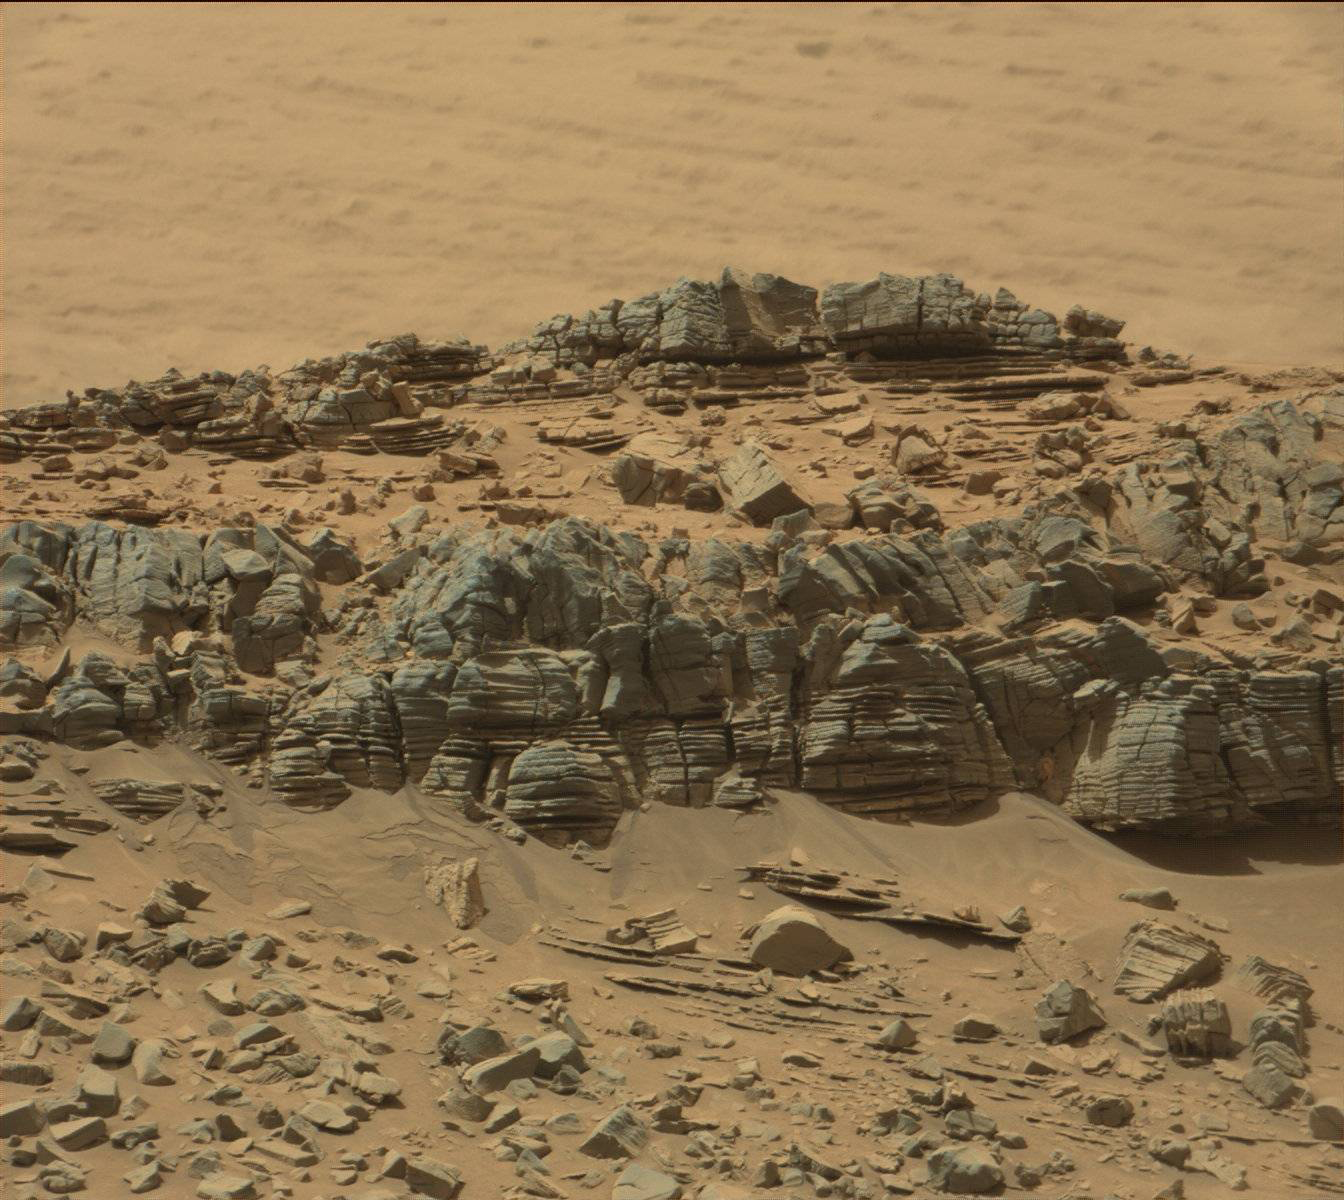 Is this a terrifying crab monster or just a pile of rocks? (NASA)